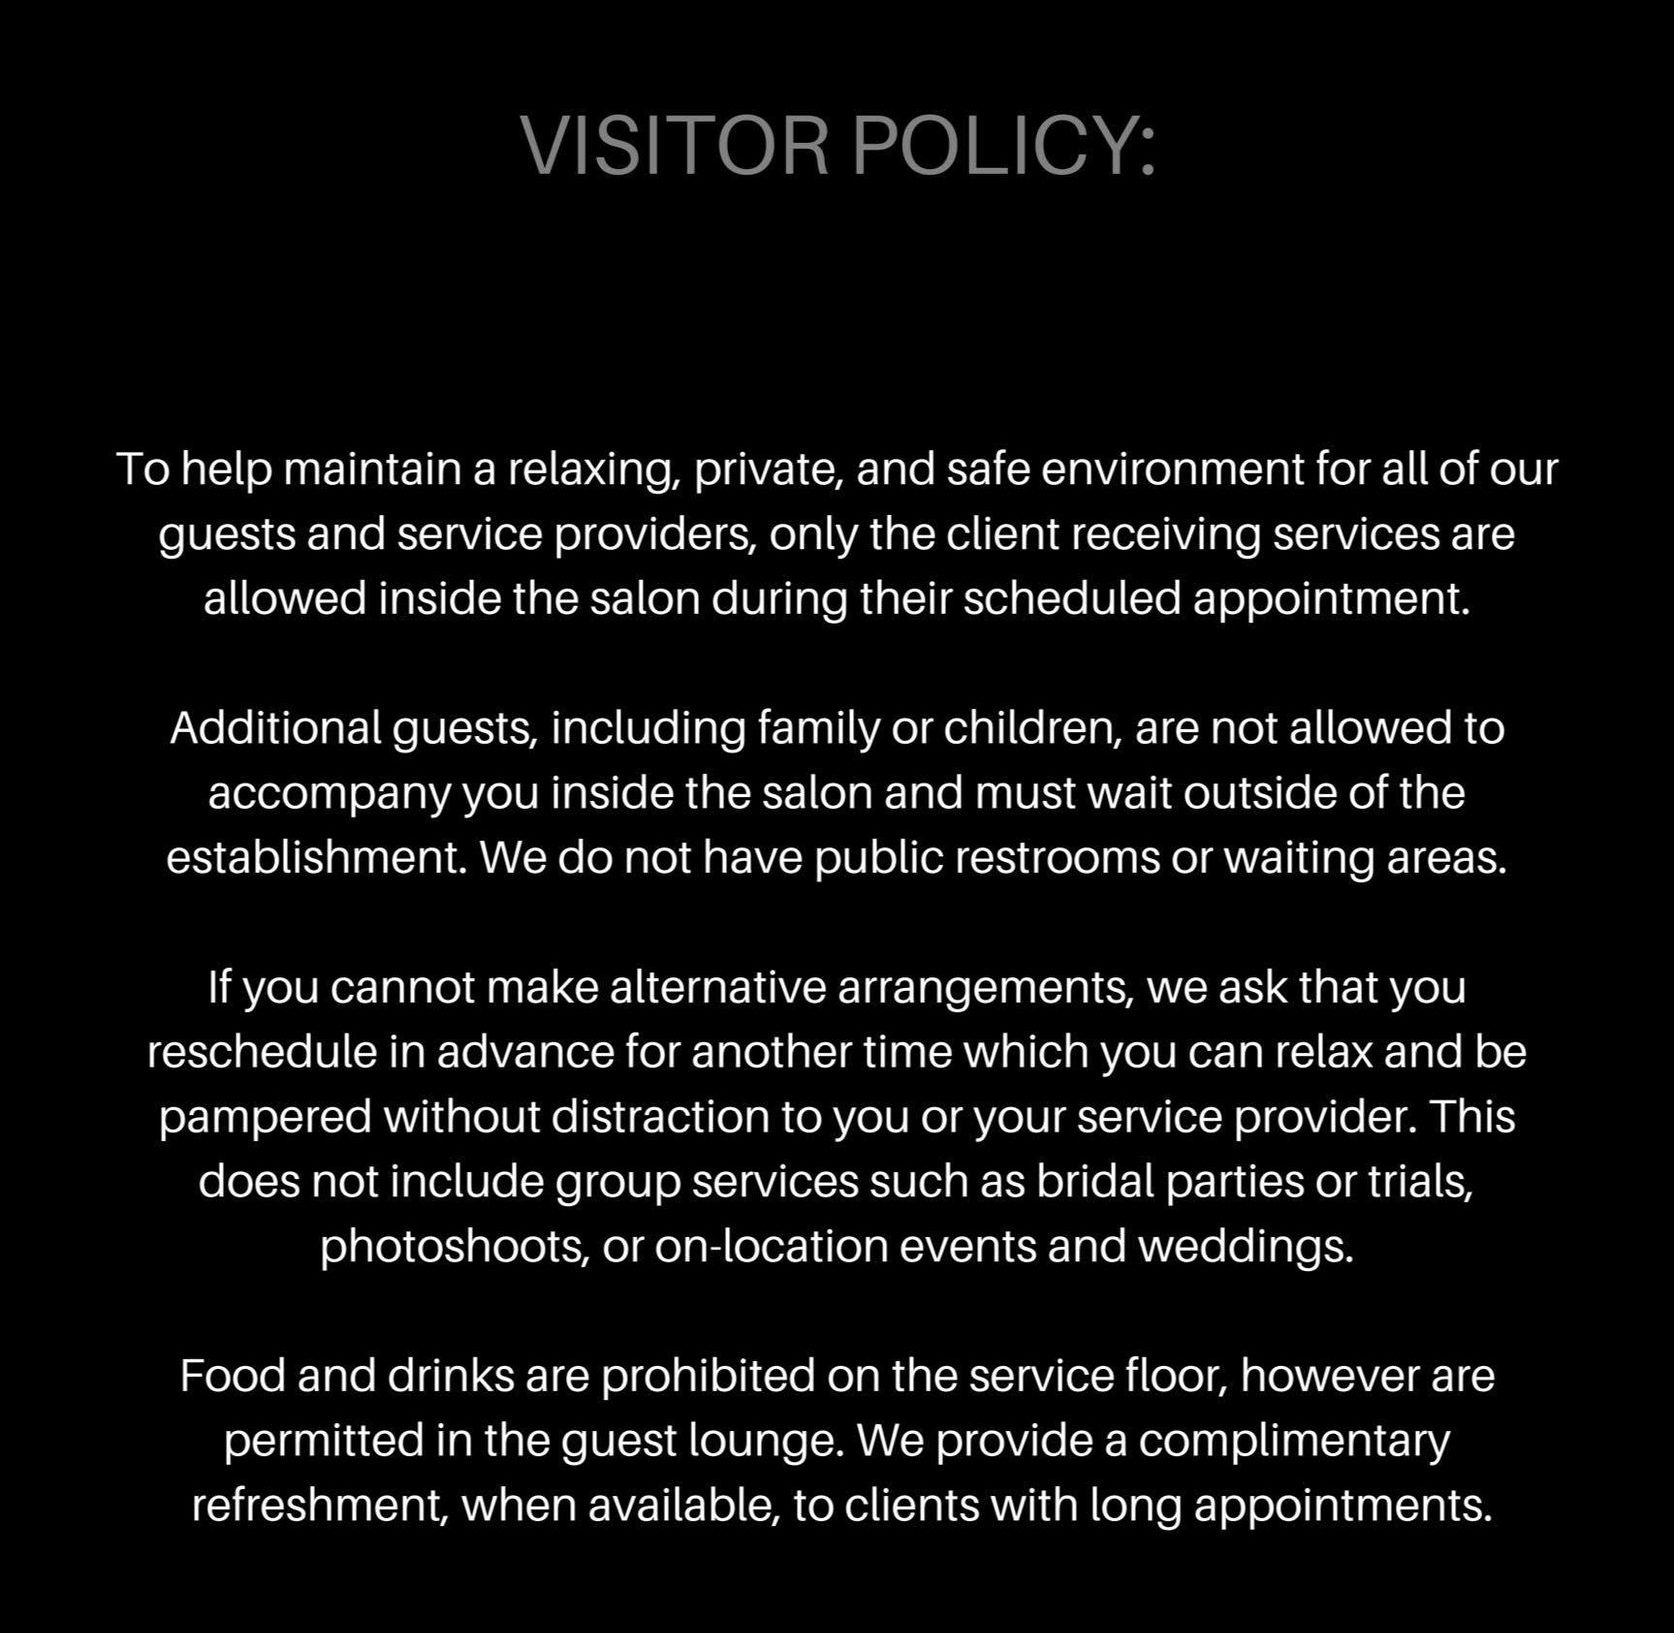 Visitor Policy